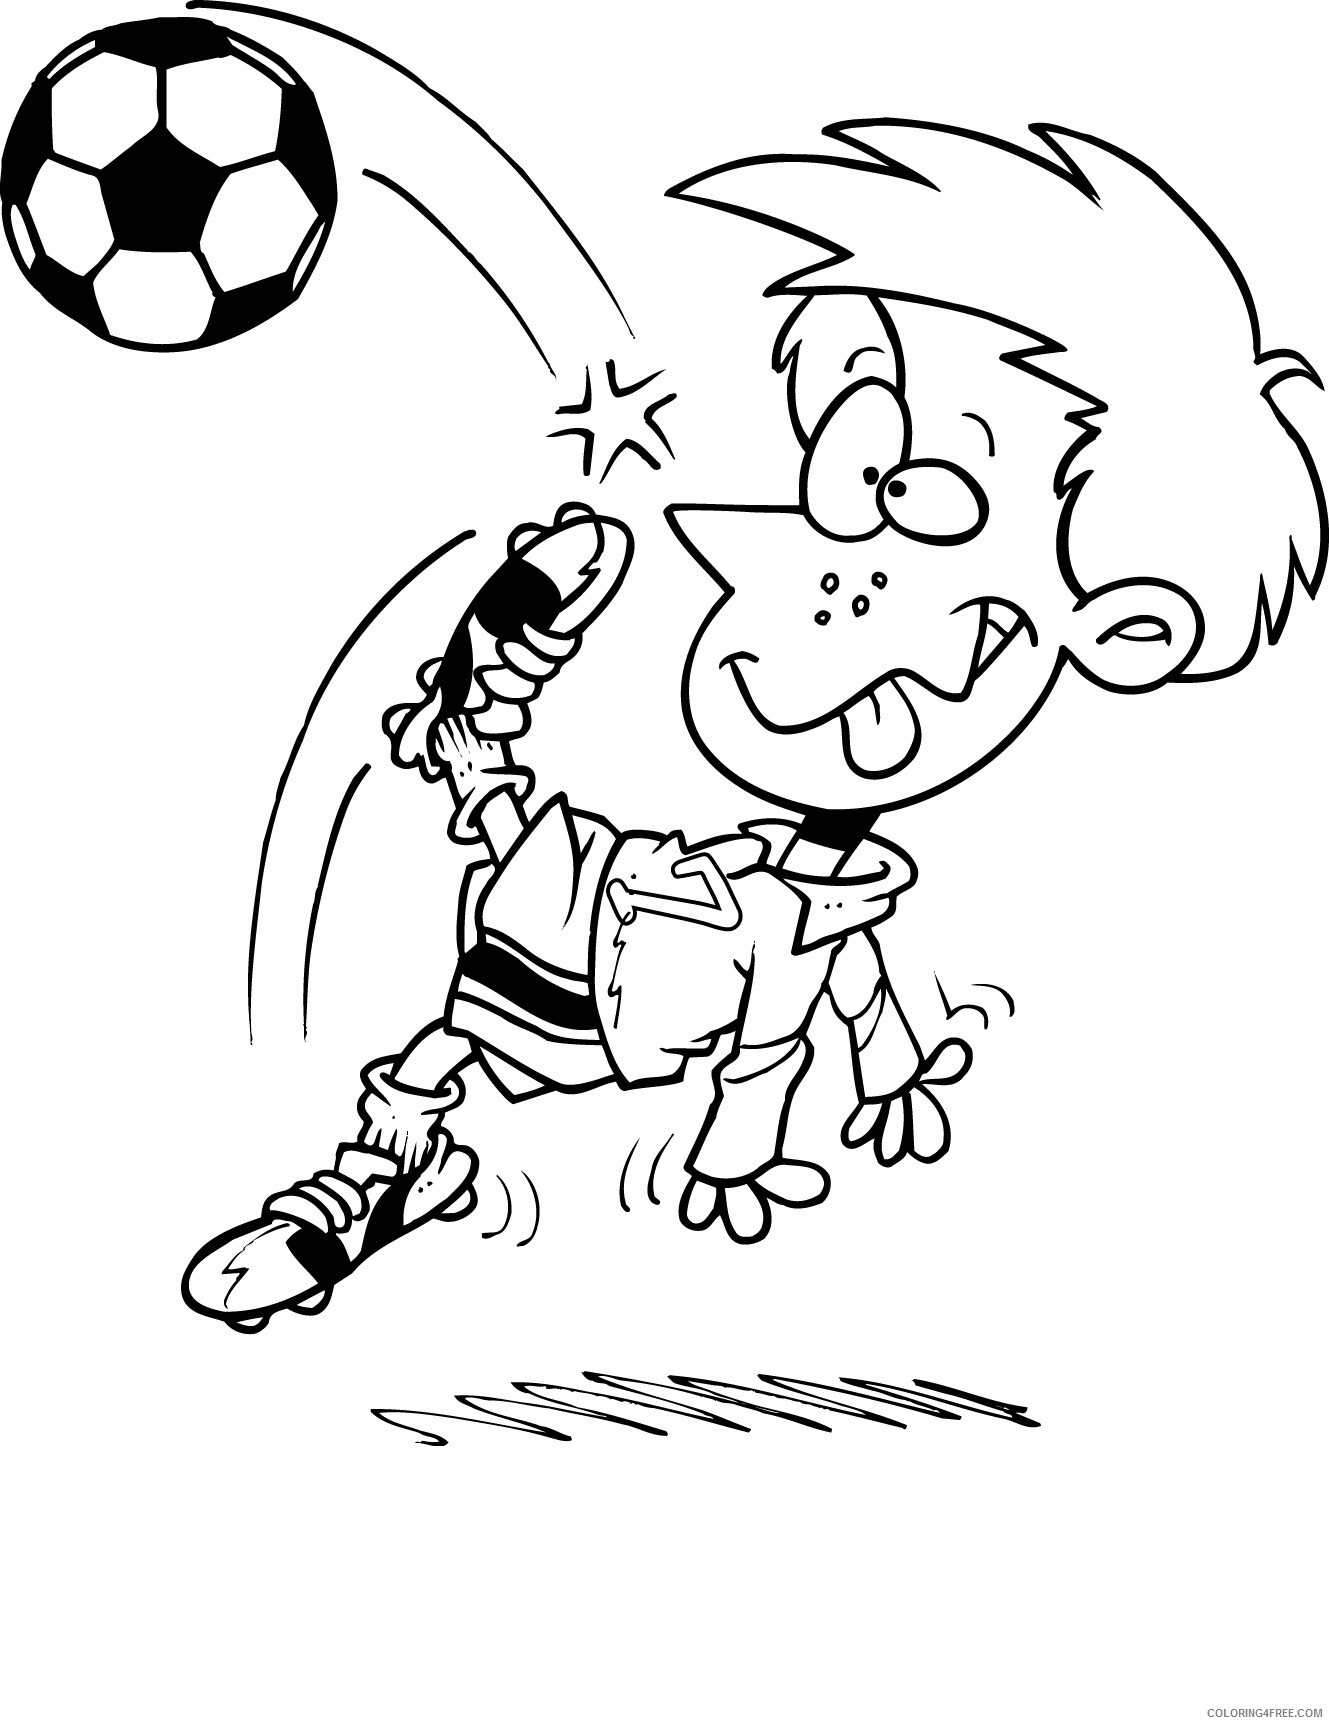 Soccer Coloring Pages for boys Soccer Printable 2020 0902 Coloring4free